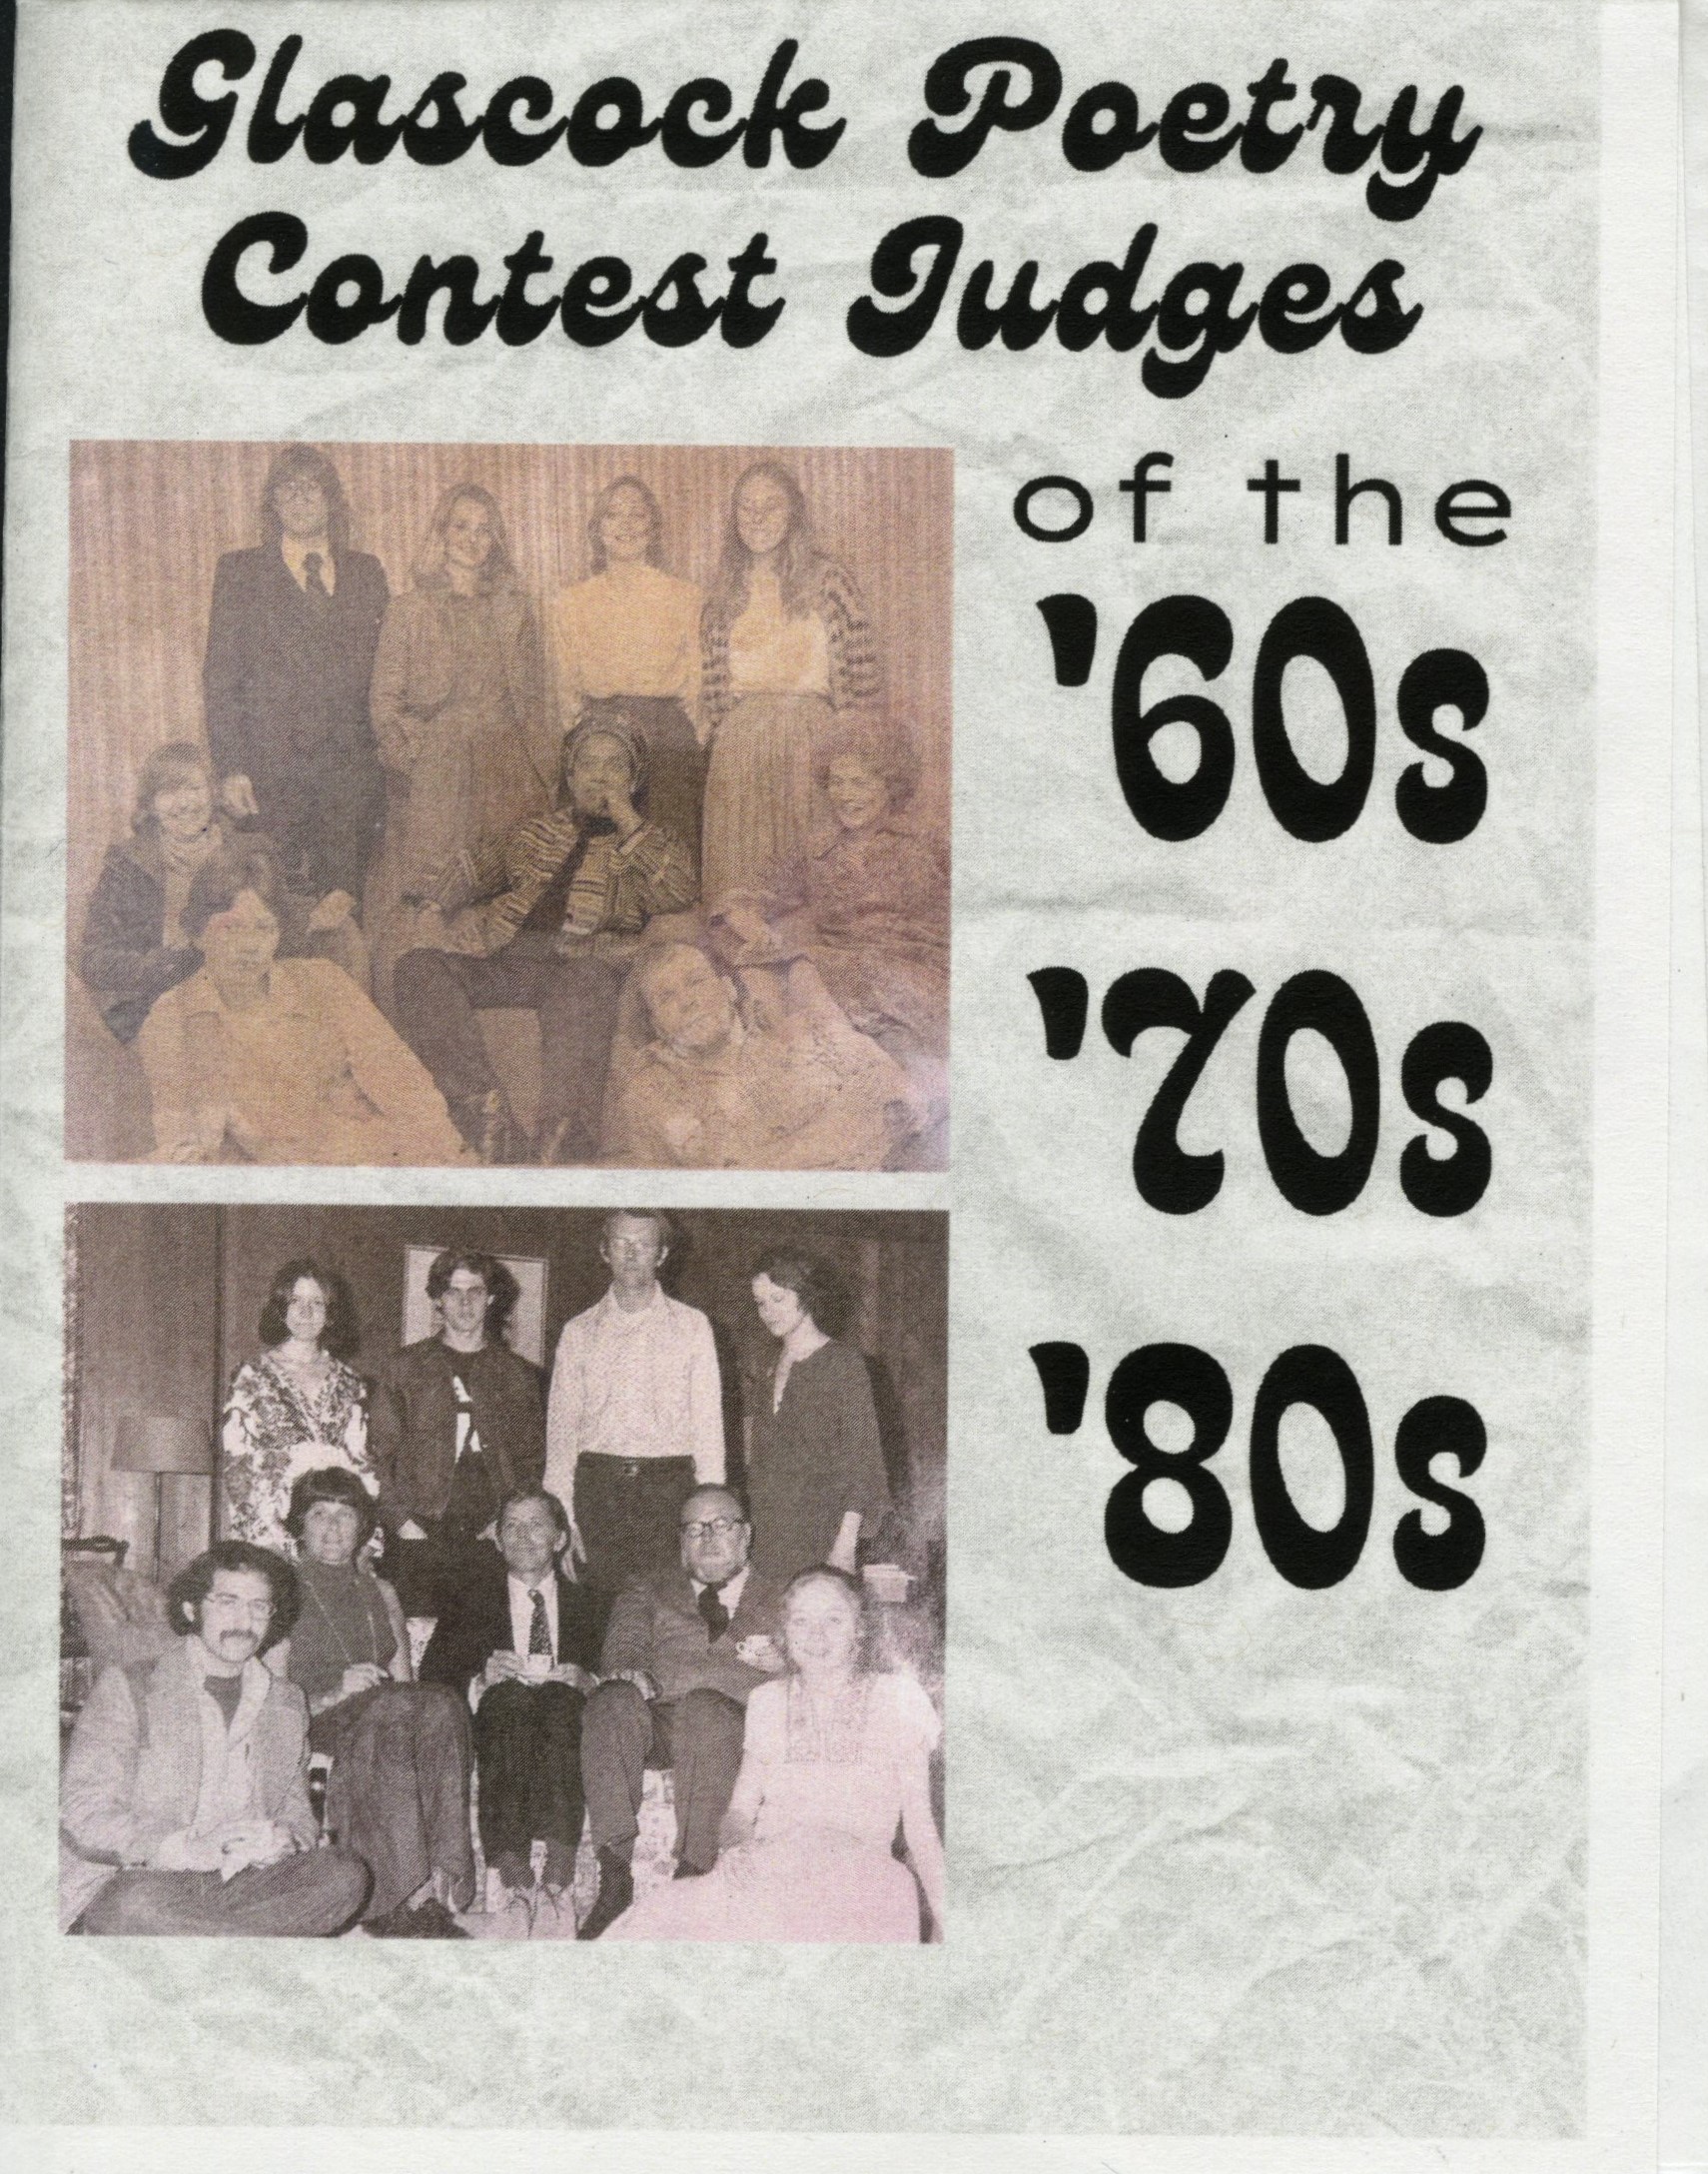 Cover featuring two black and white photographs of contestants and judges